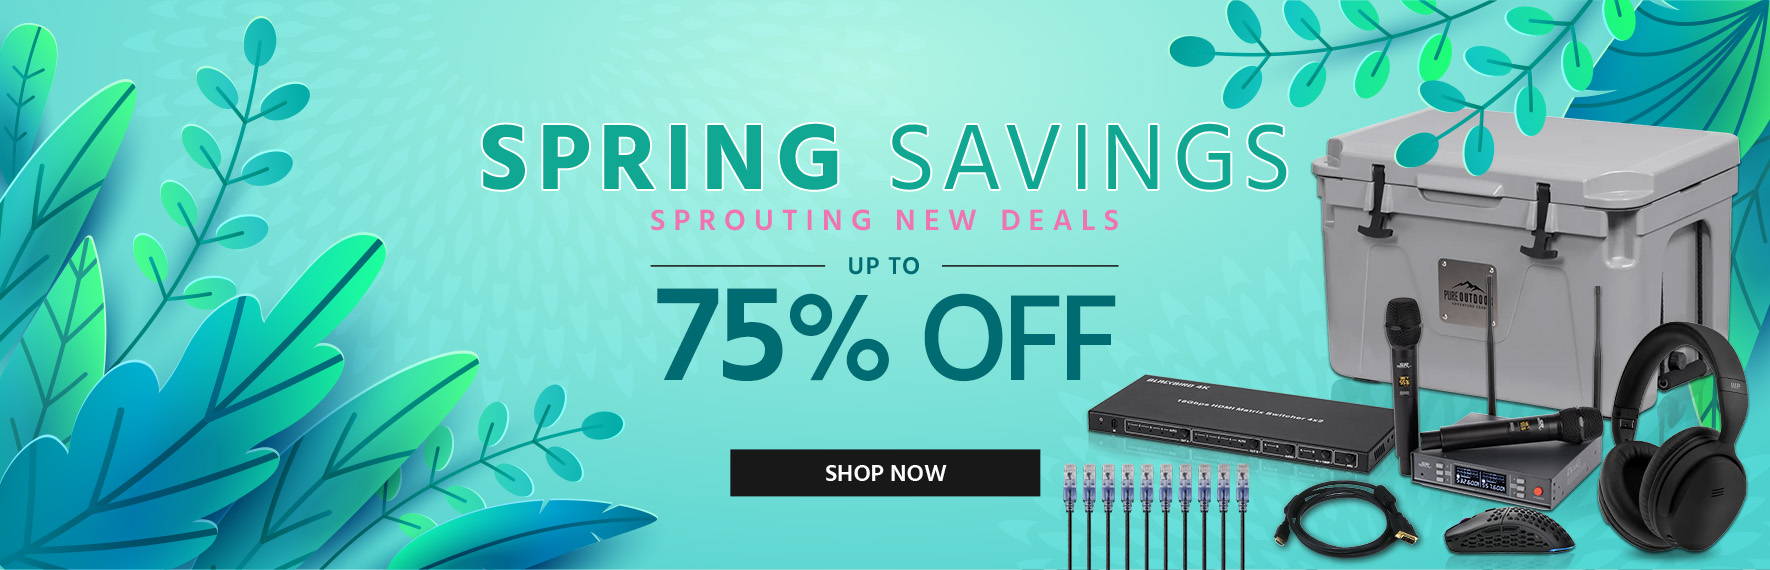 "Spring Savings  Sprouting New Deals  Up to 74% off Shop Now"